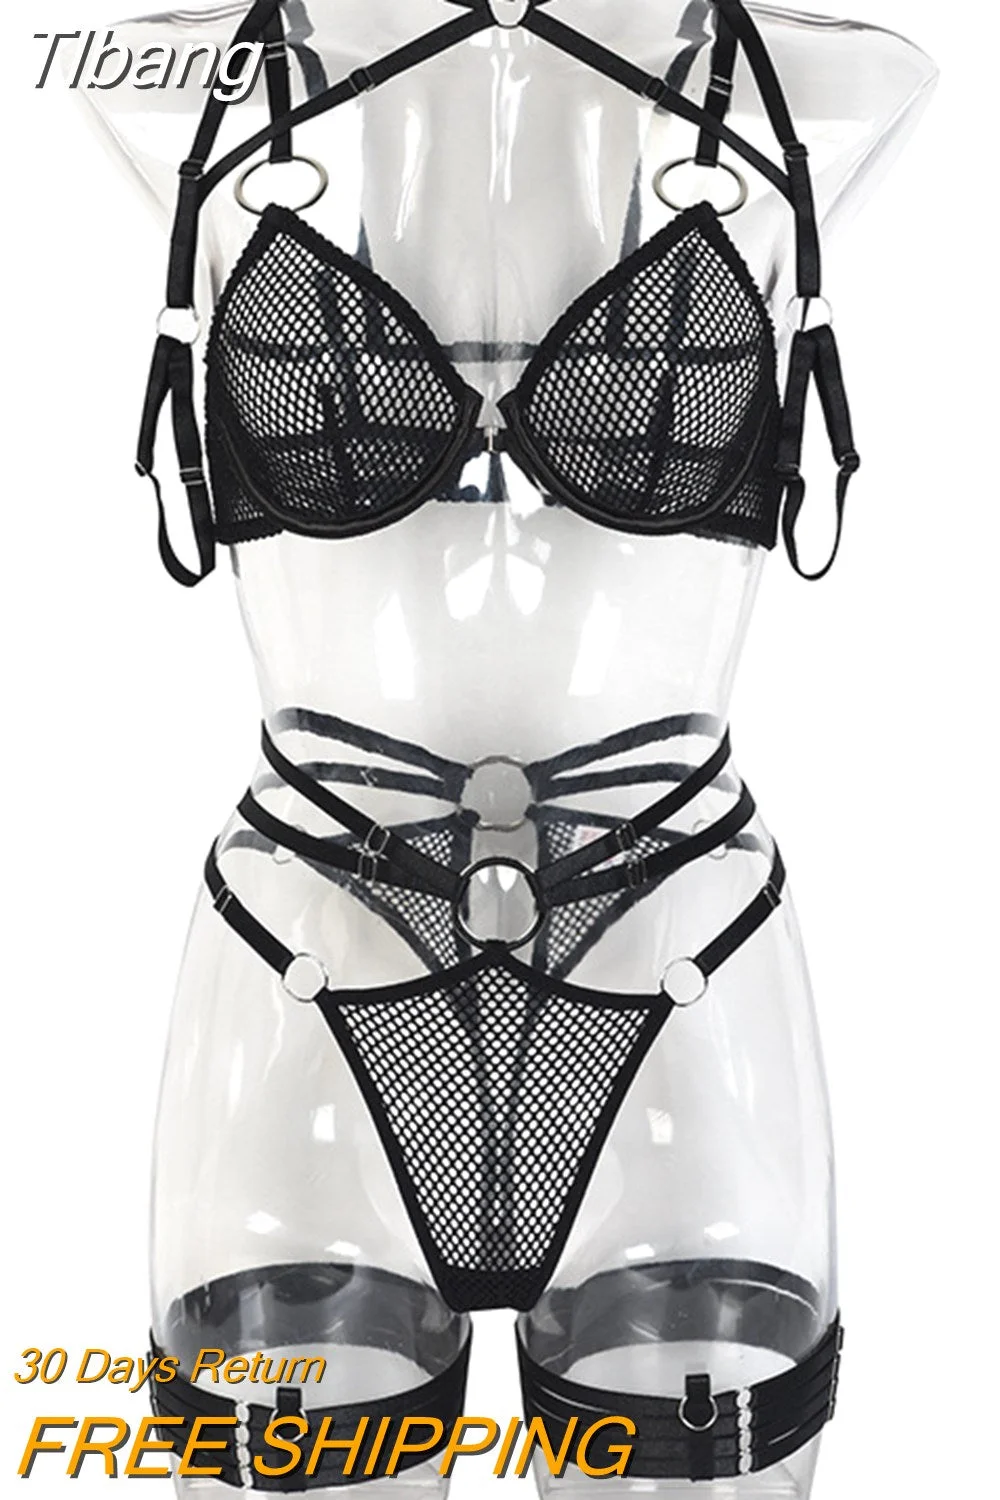 Tlbang Mesh Lingerie Sensual Crotchless Erotic Sets Transparent Women's Underwear Uncensored Video Black Sexy Intimate 4-Piece